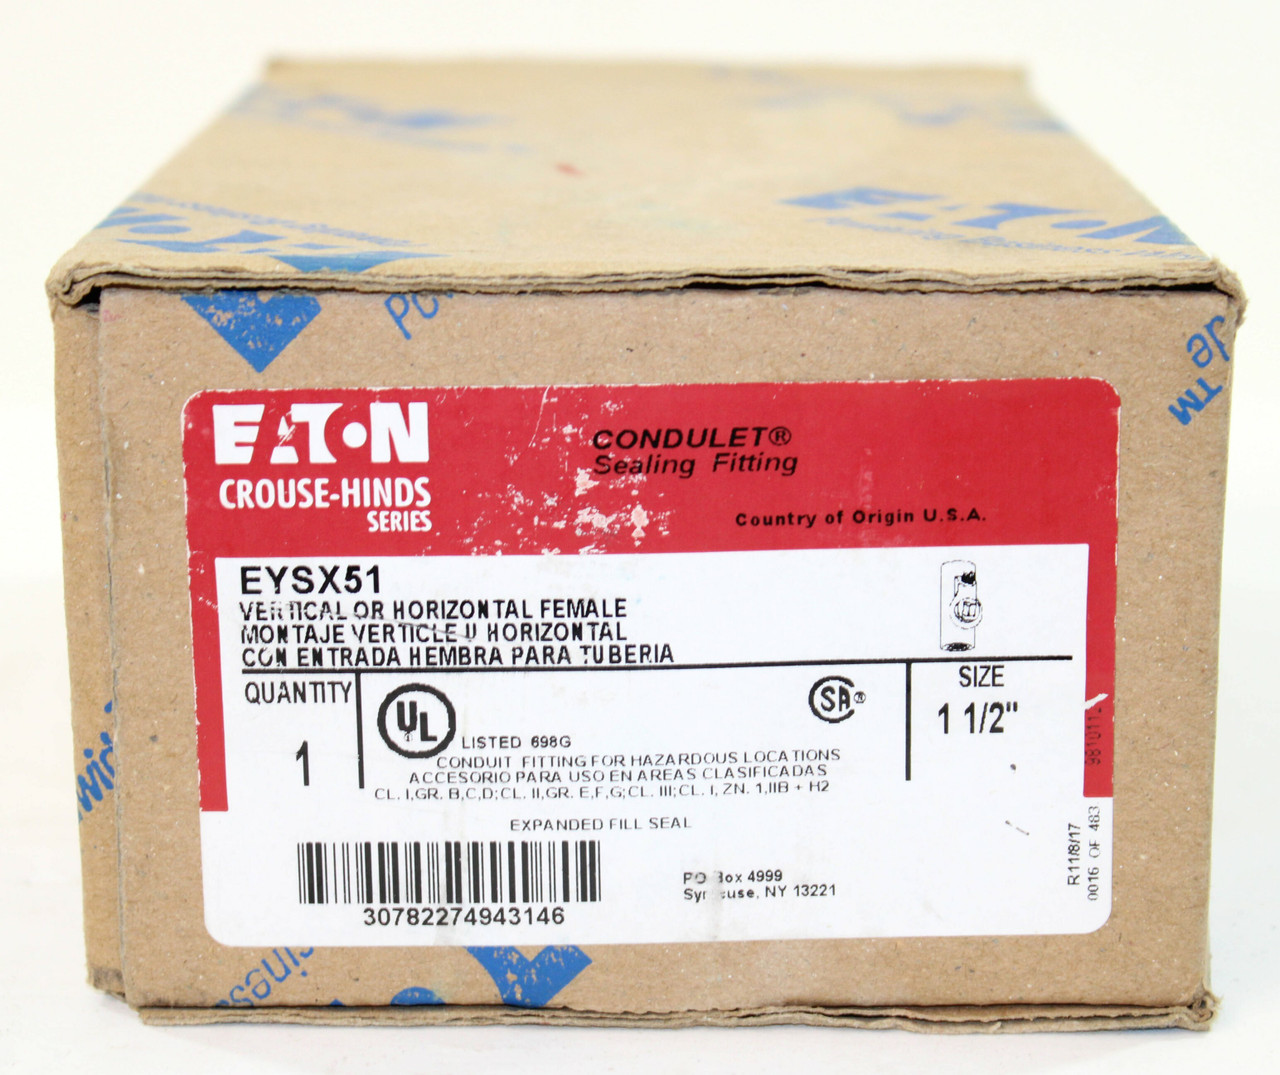 Eaton Crouse Hinds EYSX51 Expanded Fill Sealing Fitting 1-1/2 In Vertical or Horizontal Female